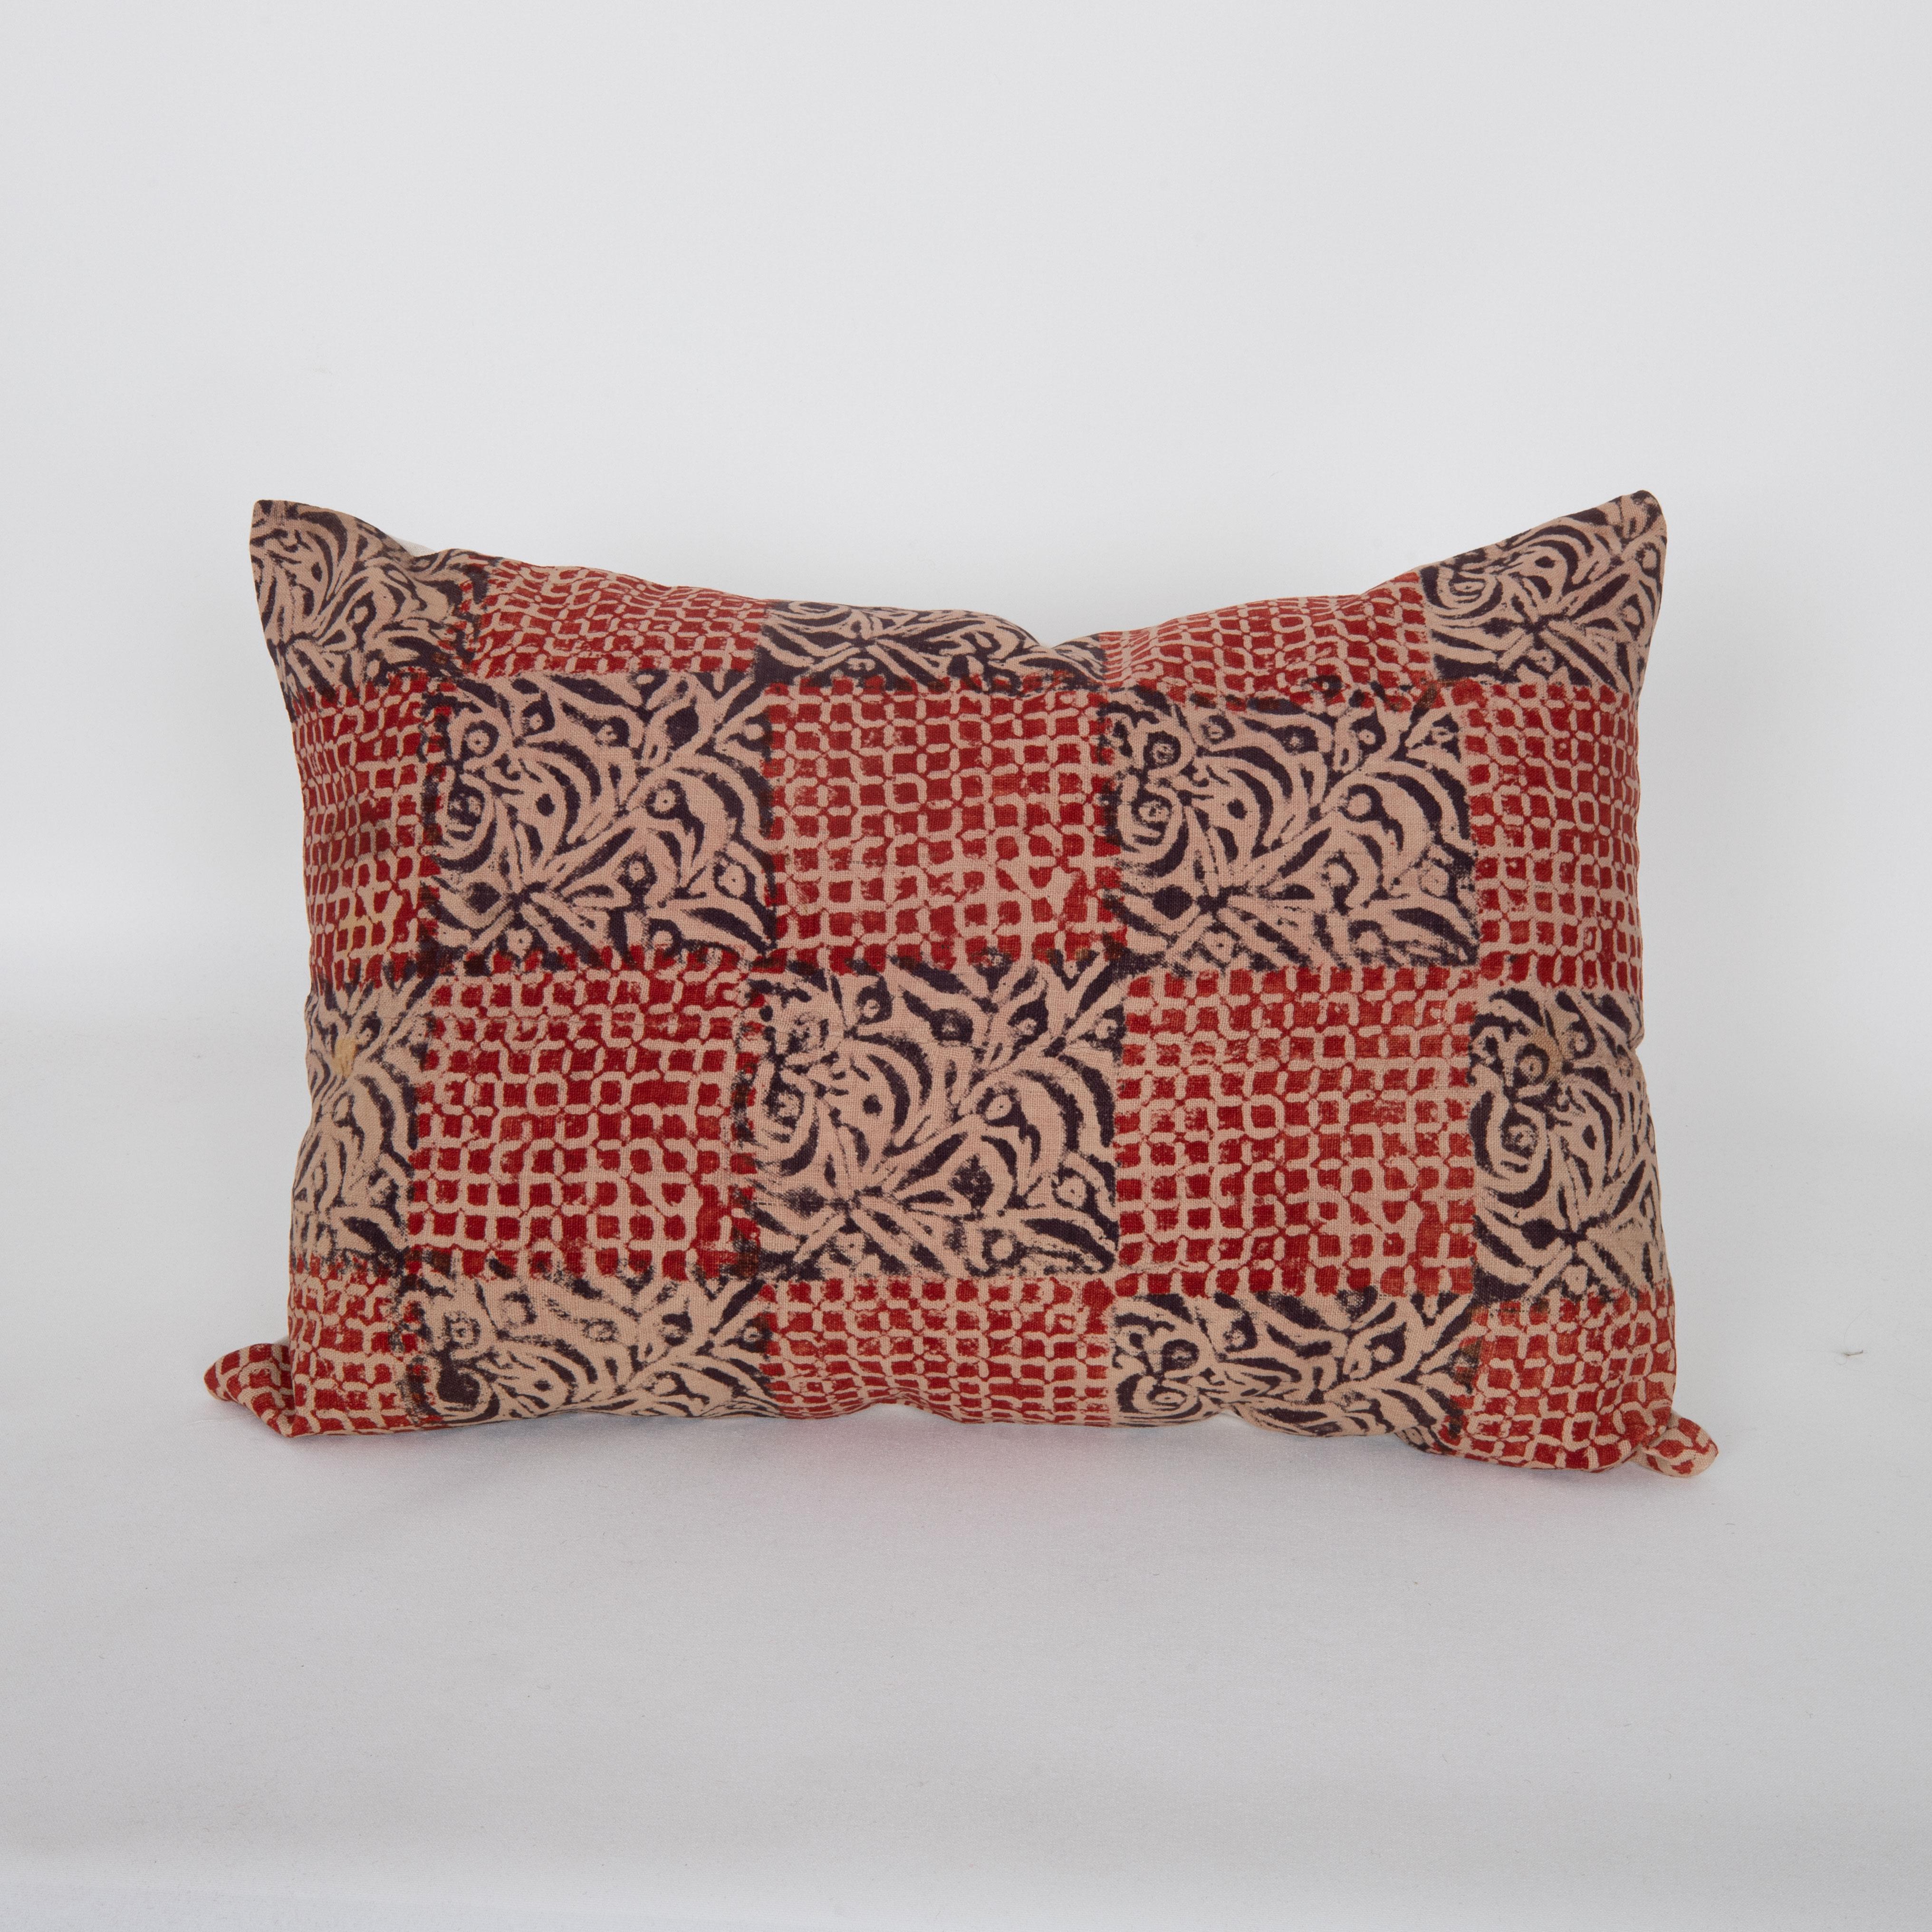 Cushion Cover is made from an early 20th C. Uzbek Hand block printed quilt top.
Shipping is complimentary.

It does not come with an insert.
Linen in the back.
Zipper closure.
Dry Cleaning is recommended.
